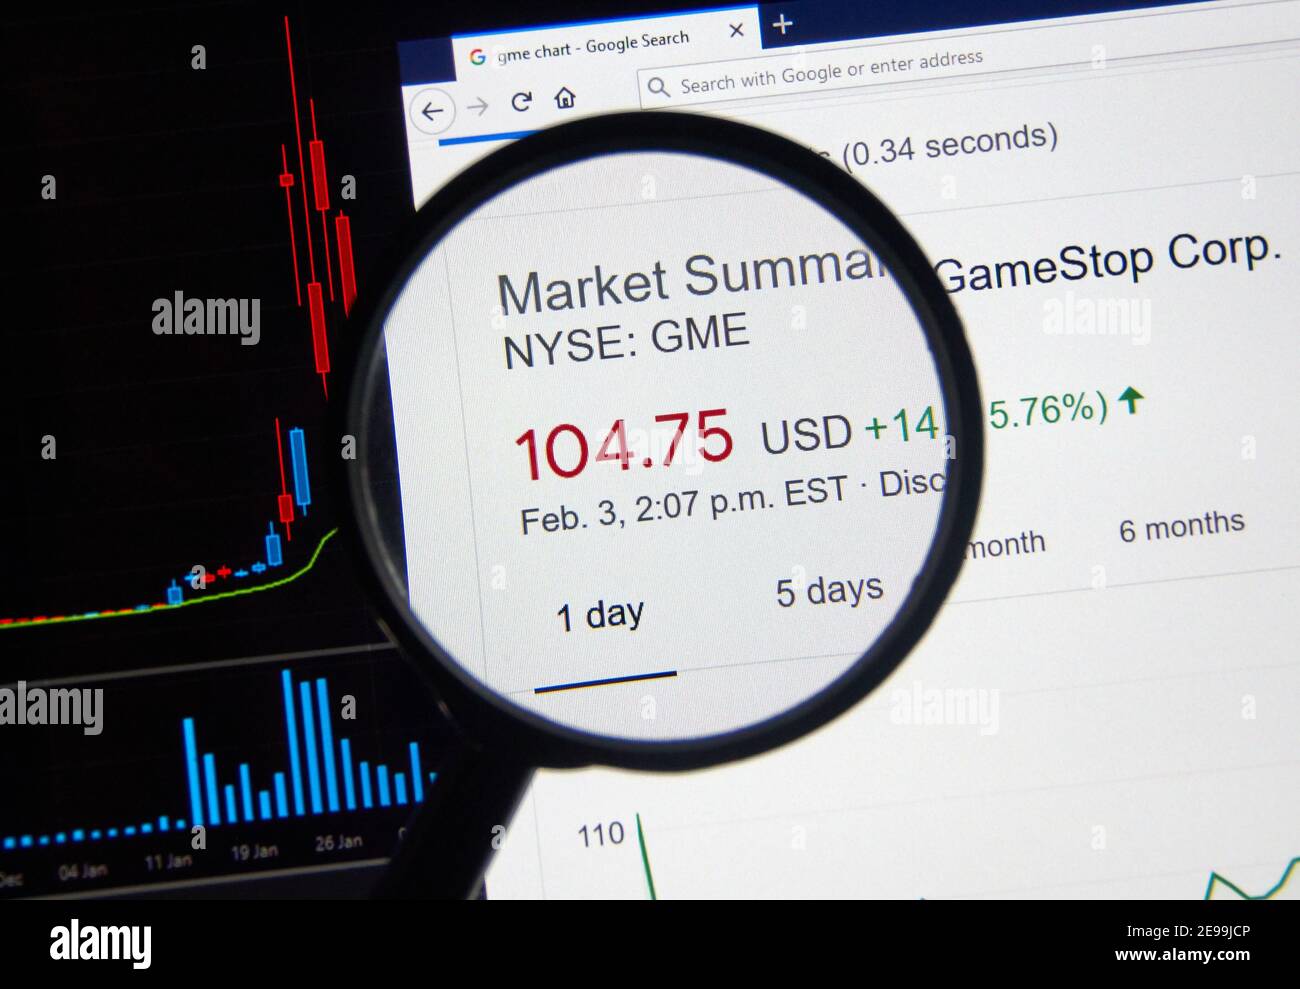 Montreal, Canada - February 3, 2021: GME GameStop price over chart under magnifying loop. Gamestop GameStop Corp. is an American video game, consumer Stock Photo